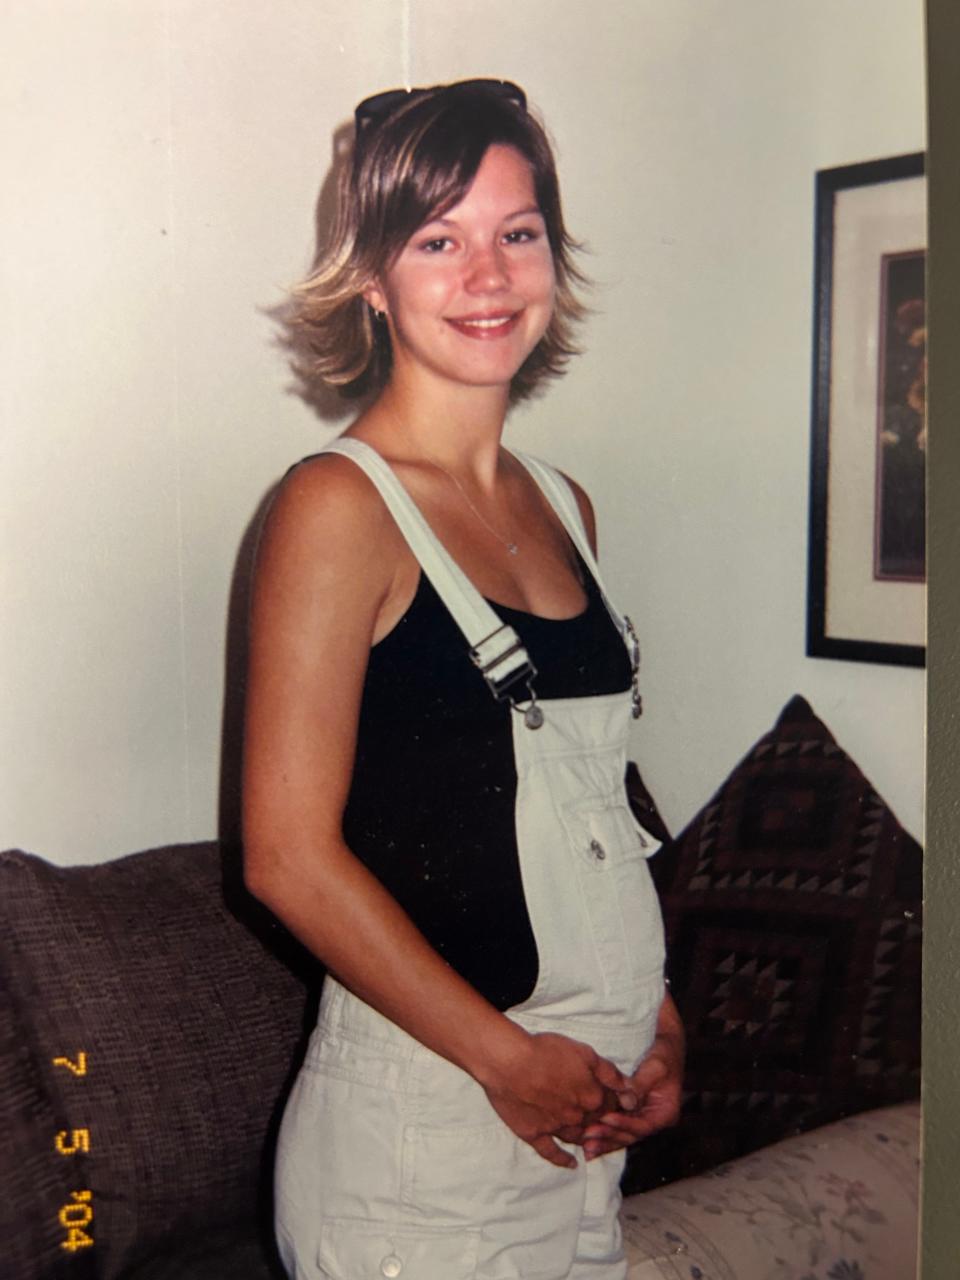 Laura Jones is pictured when she was pregnant with her first child around 20 years old.